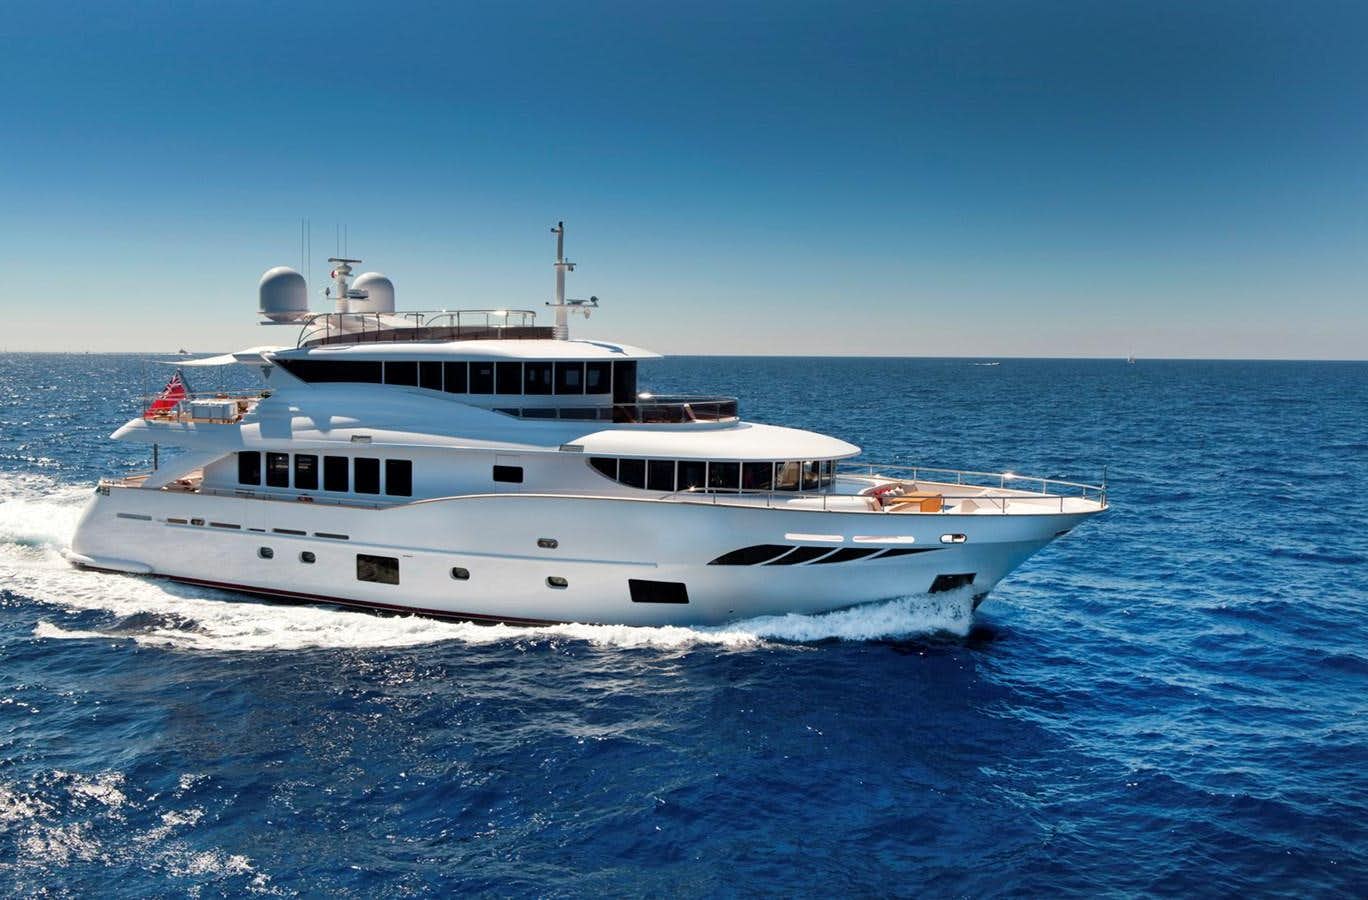 Watch Video for GATSBY Yacht for Sale